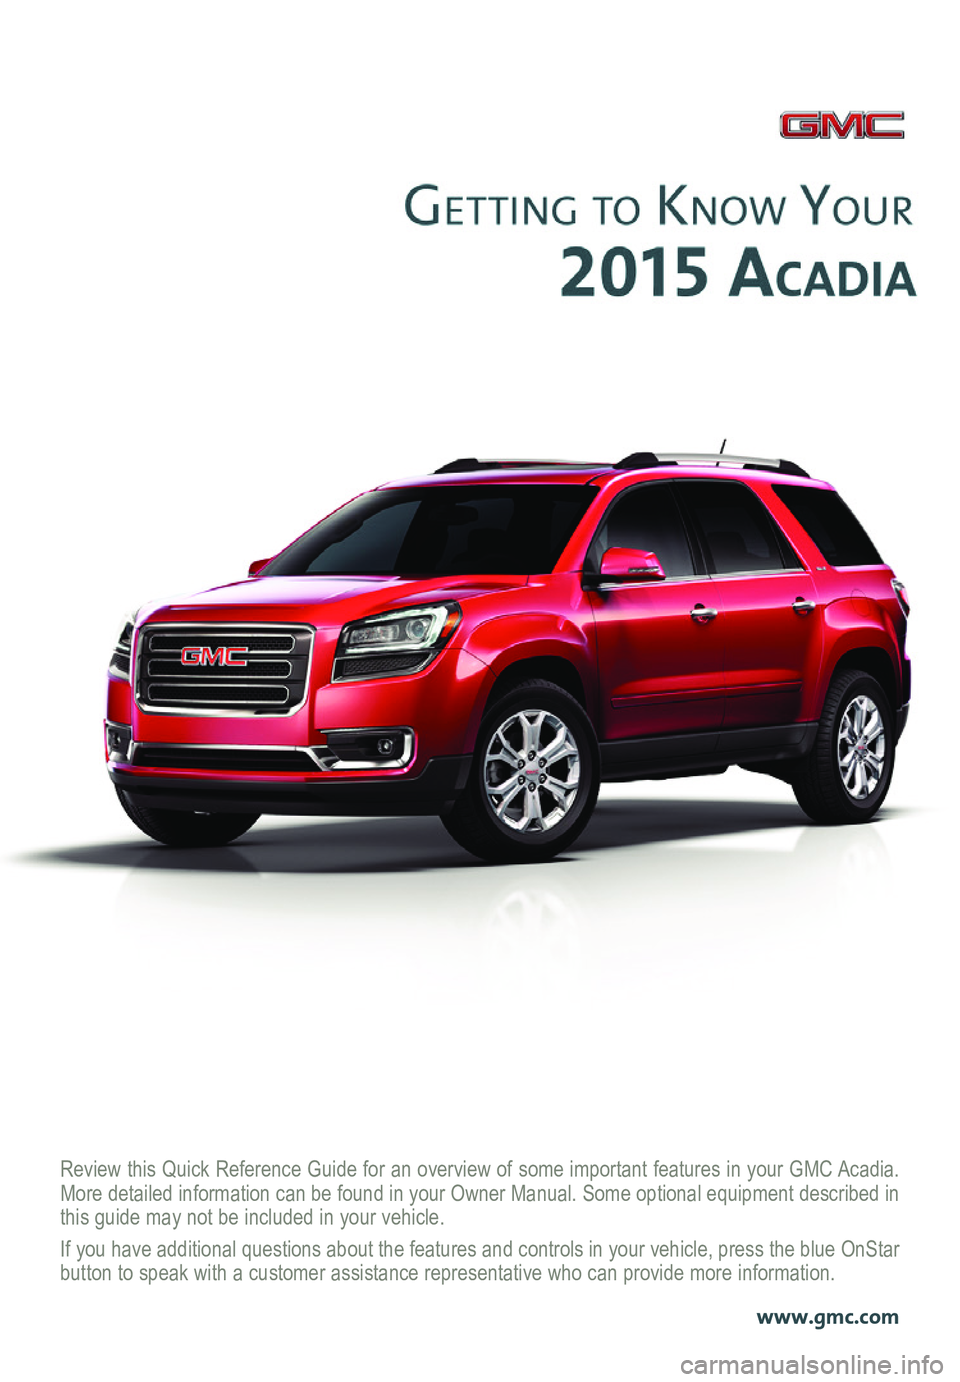 GMC ACADIA 2015  Get To Know Guide 